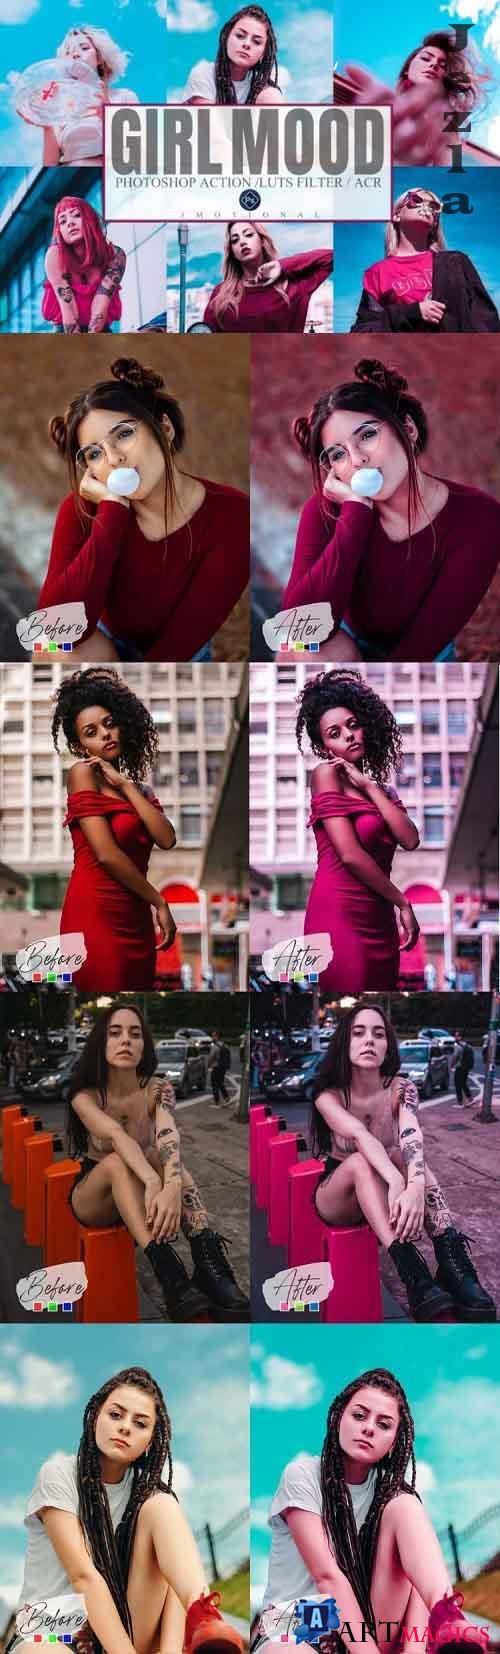 7 Girl Mood Photoshop Actions, ACR, LUT Presets